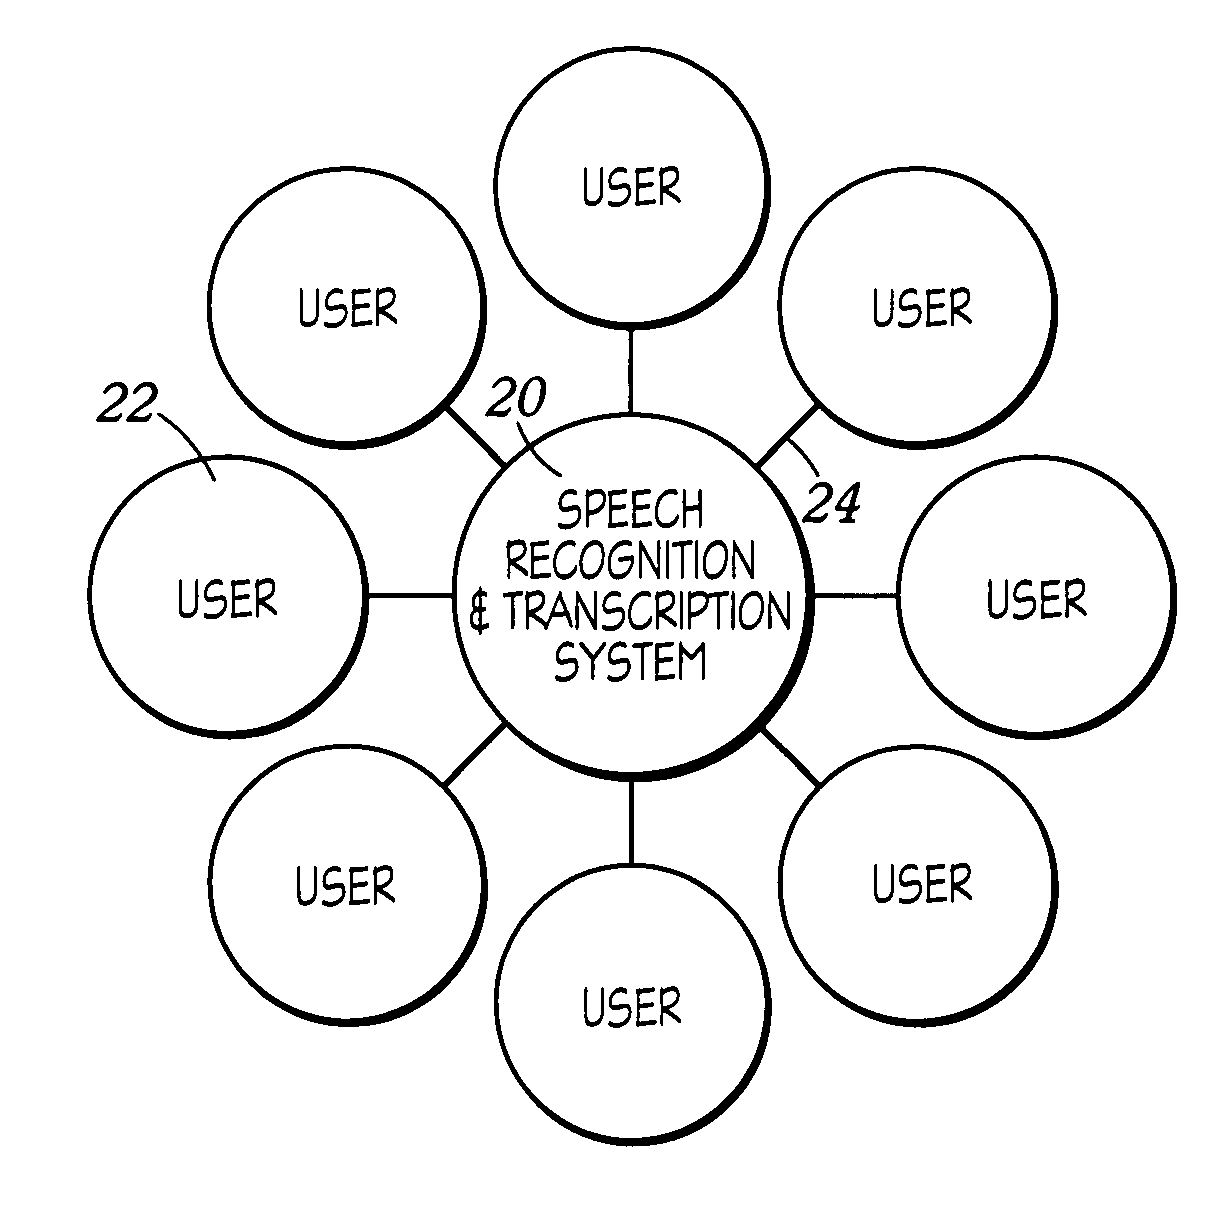 Speech recognition and transcription among users having heterogeneous protocols